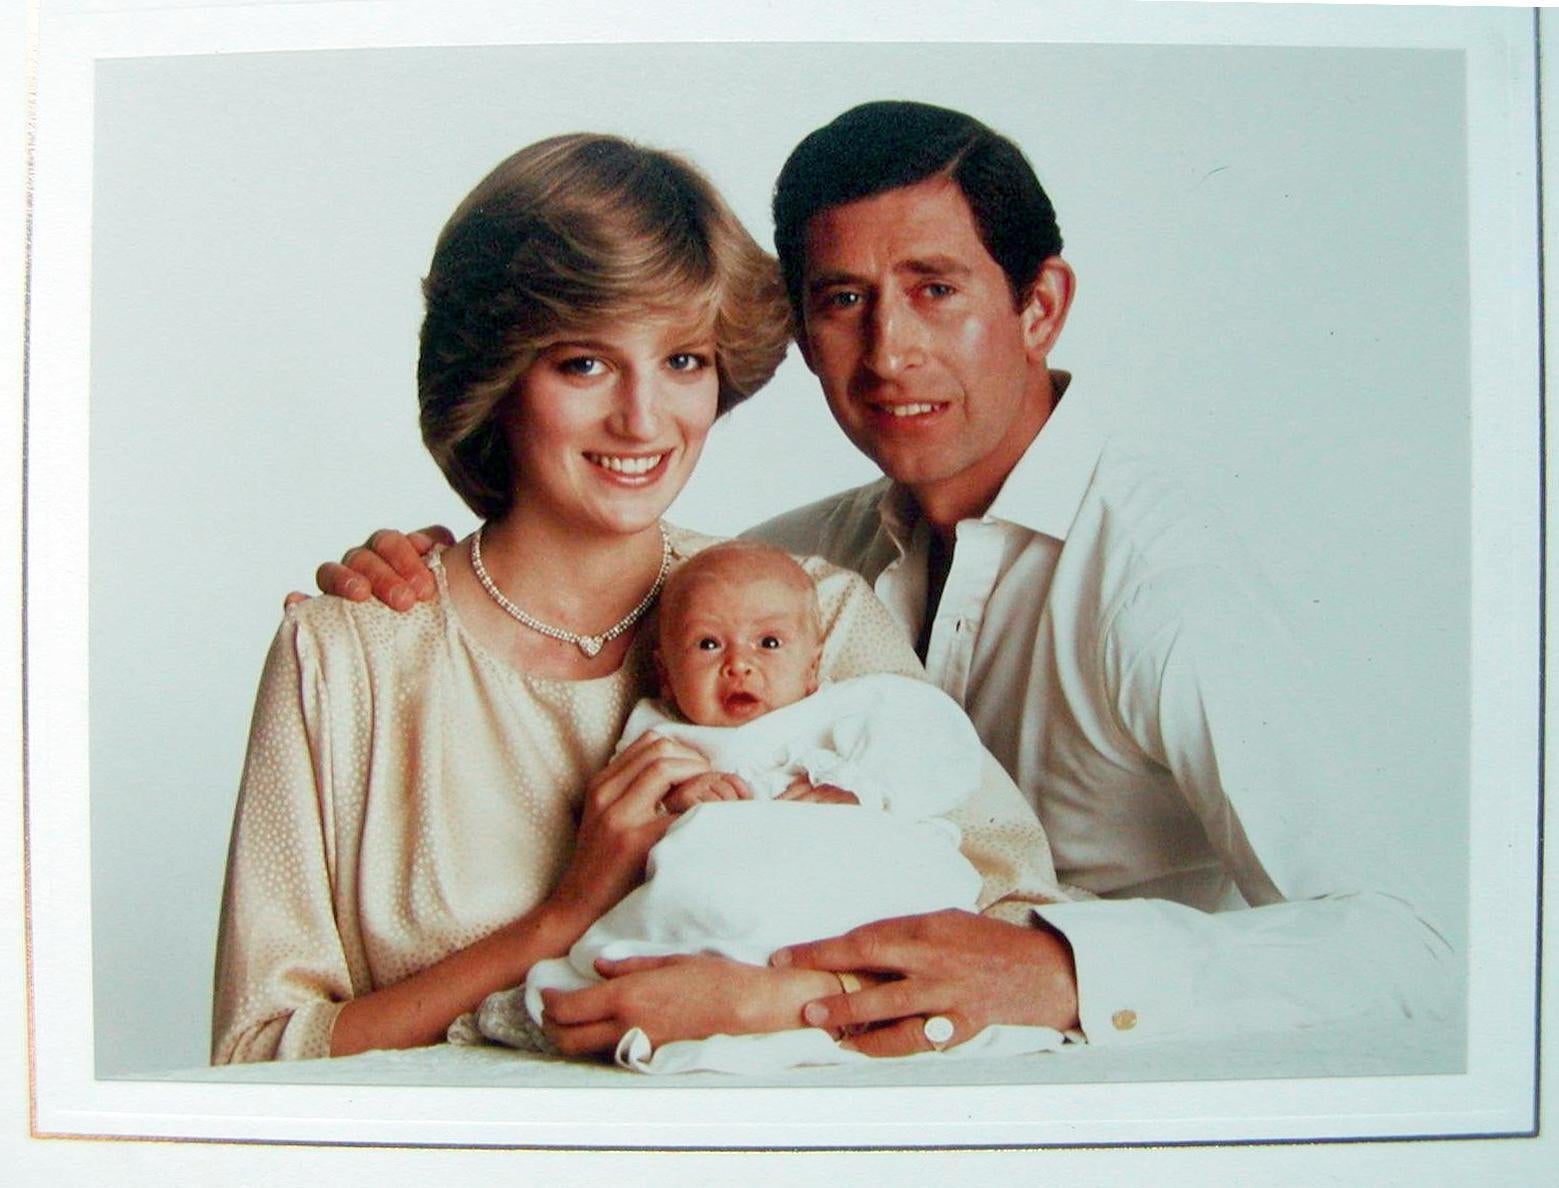 Royal Christmas card bearing a full-color family photograph of Prince Charles, Princess Diana, and the infant Prince William from 1982